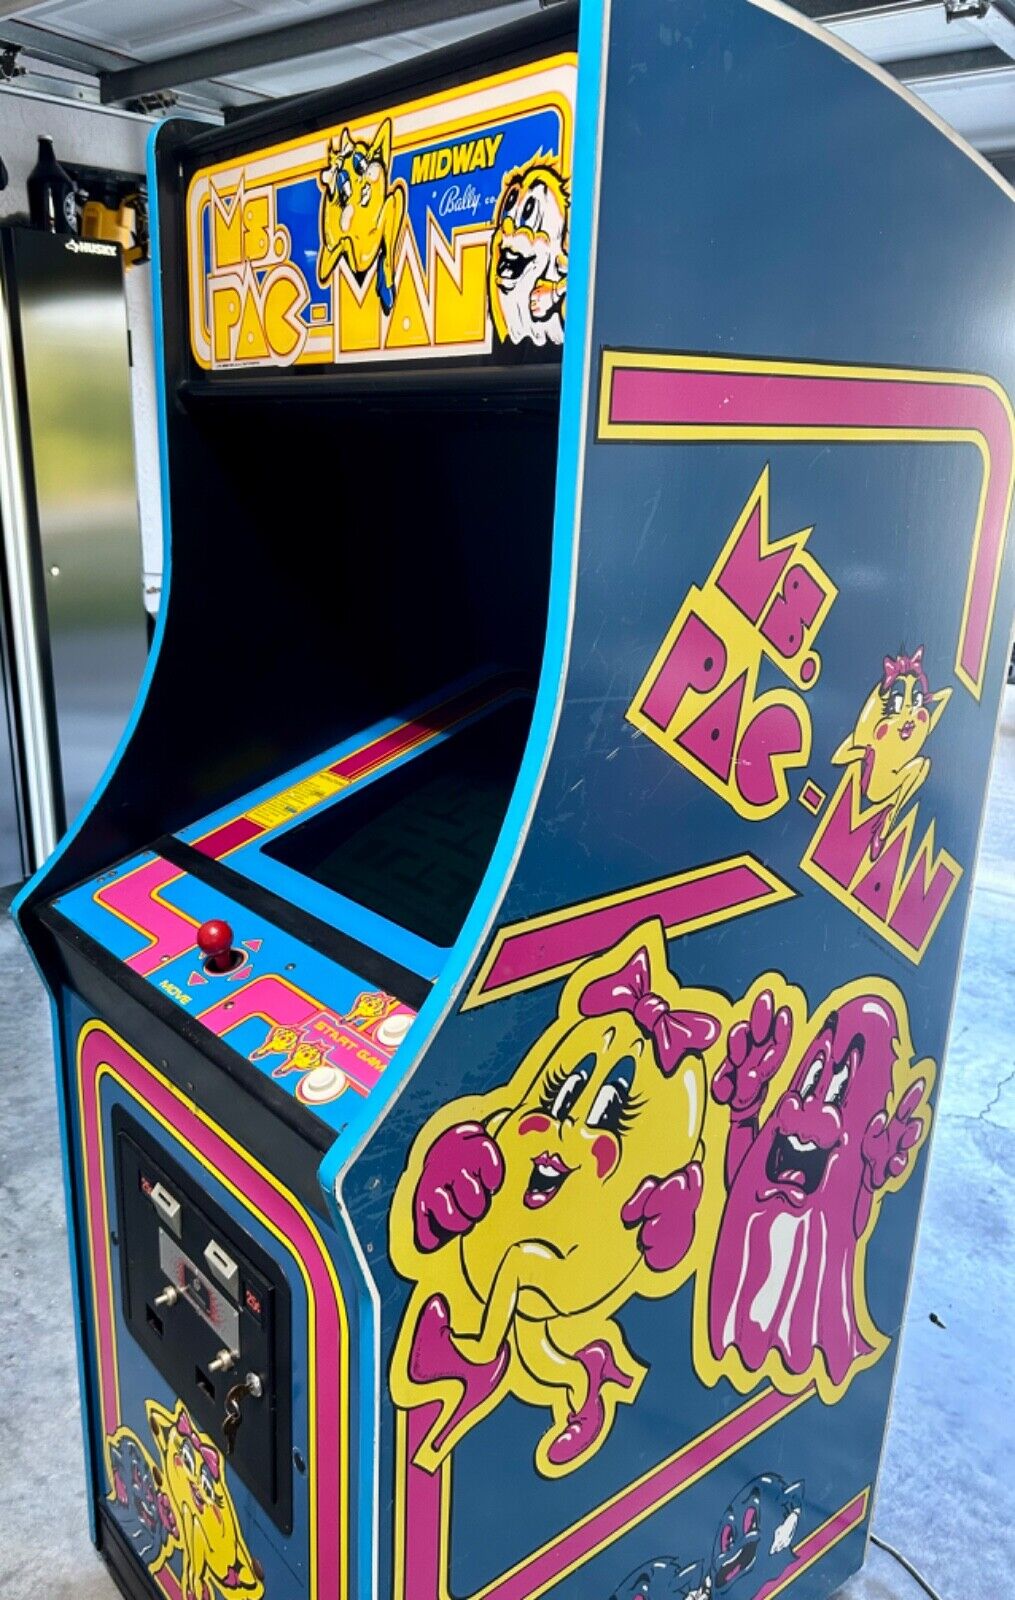 Original 1981 Midway MS PAC MAN arcade game Machine Very clean in and out